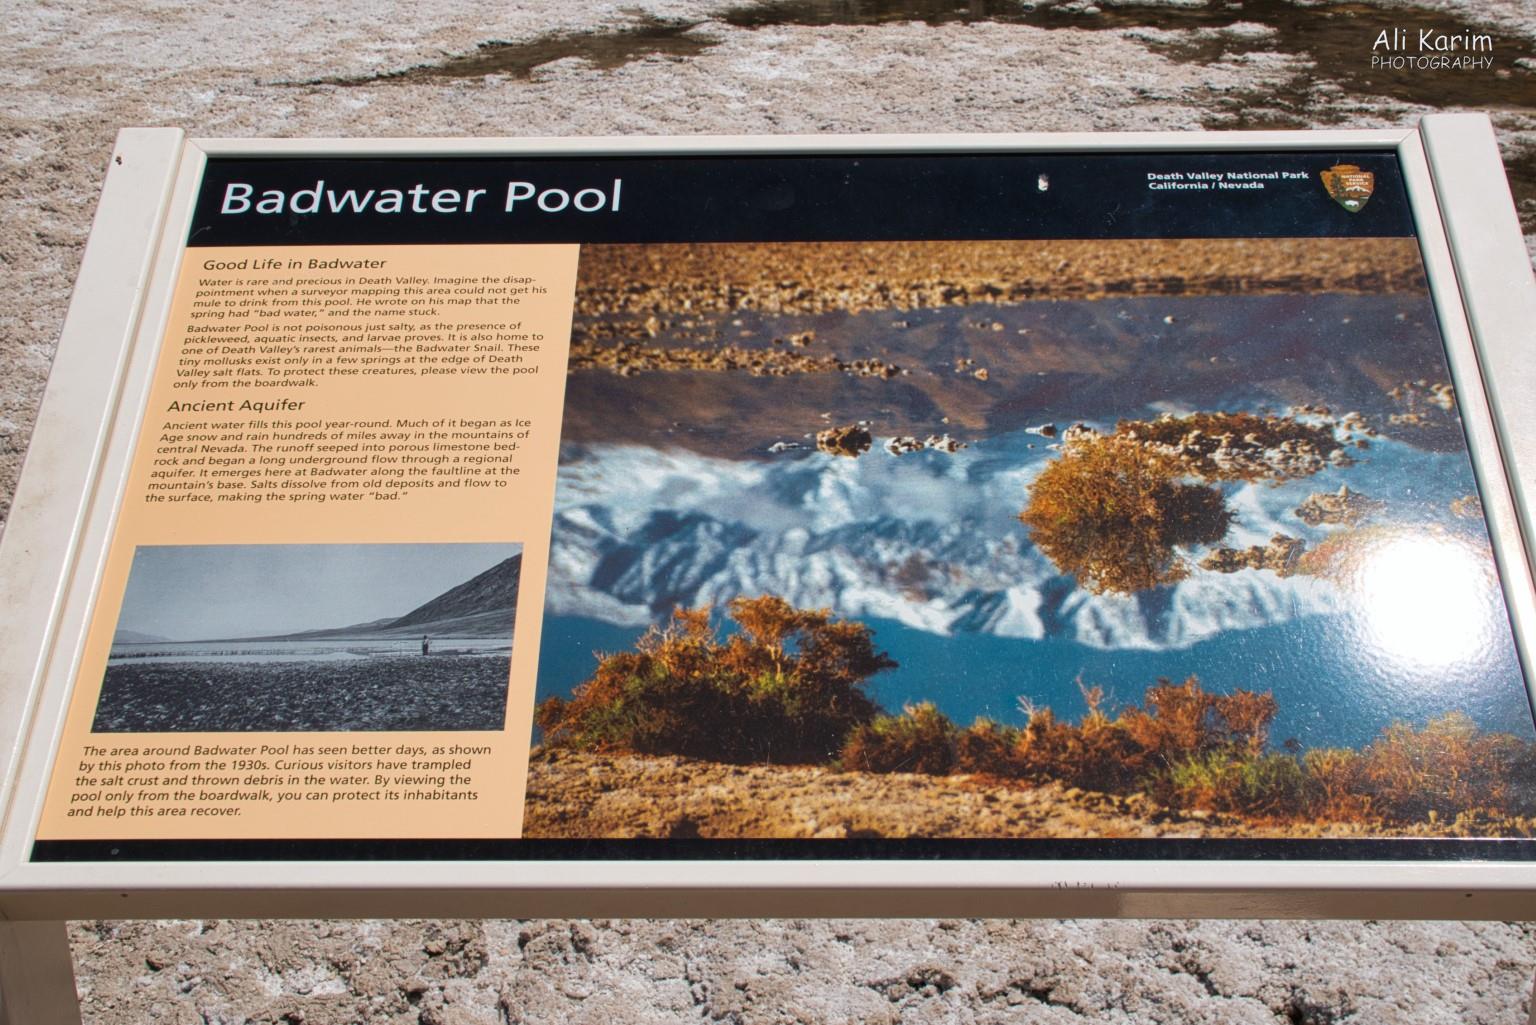 Death Valley National Park, June 2020, How Badwater Basin got its name